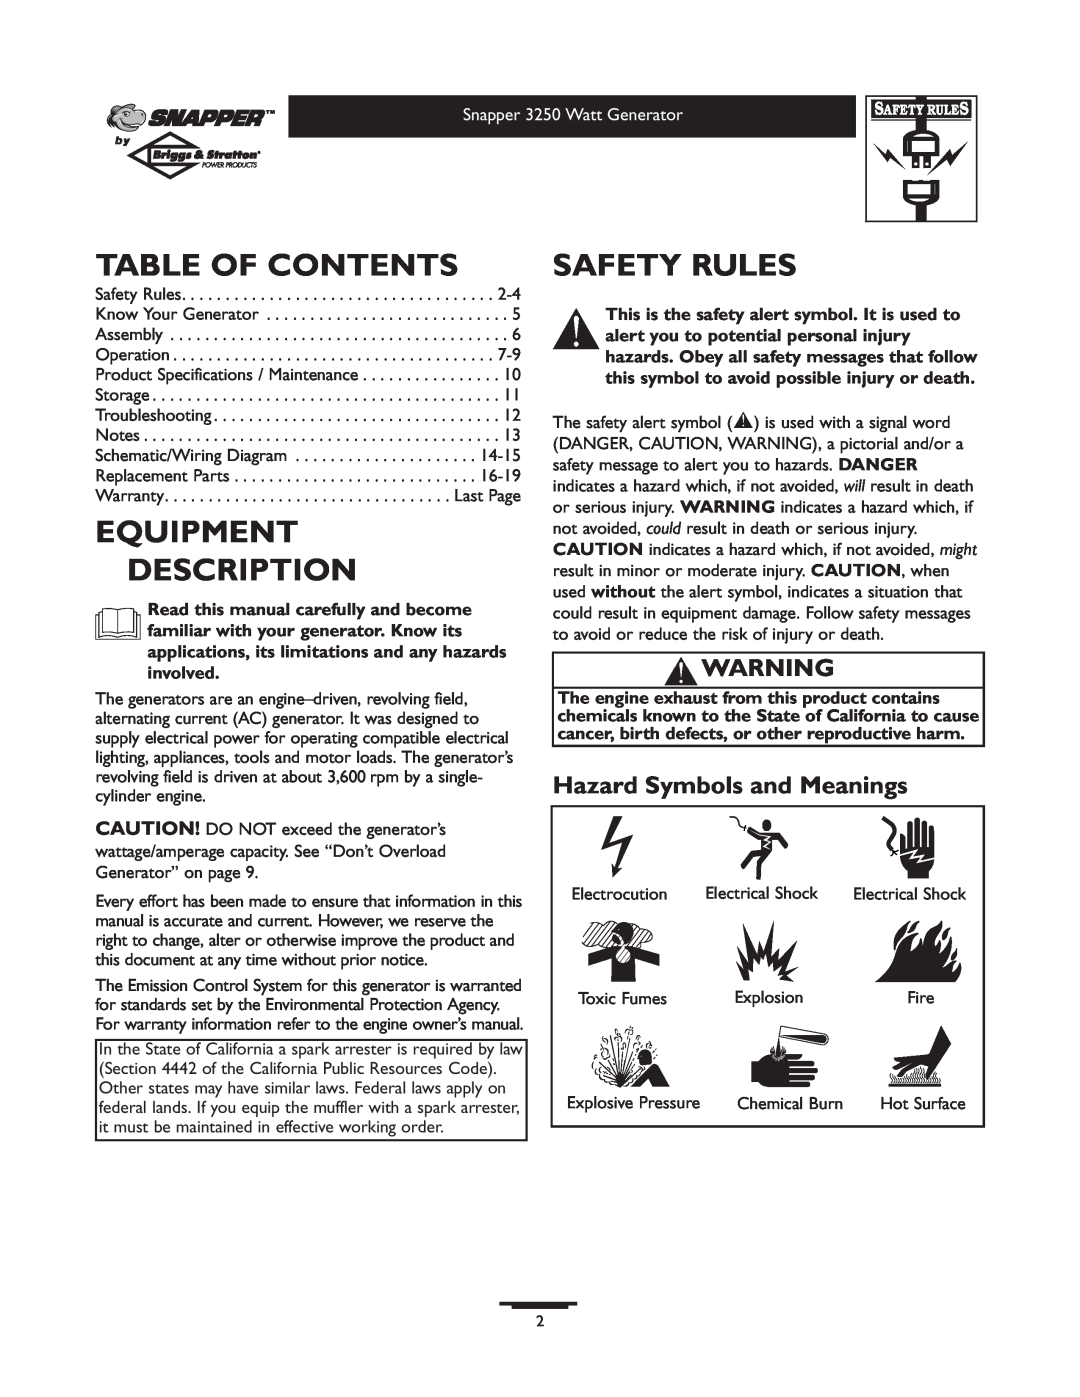 Snapper 1667-0 owner manual Table Of Contents, Equipment Description, Safety Rules, Hazard Symbols and Meanings 